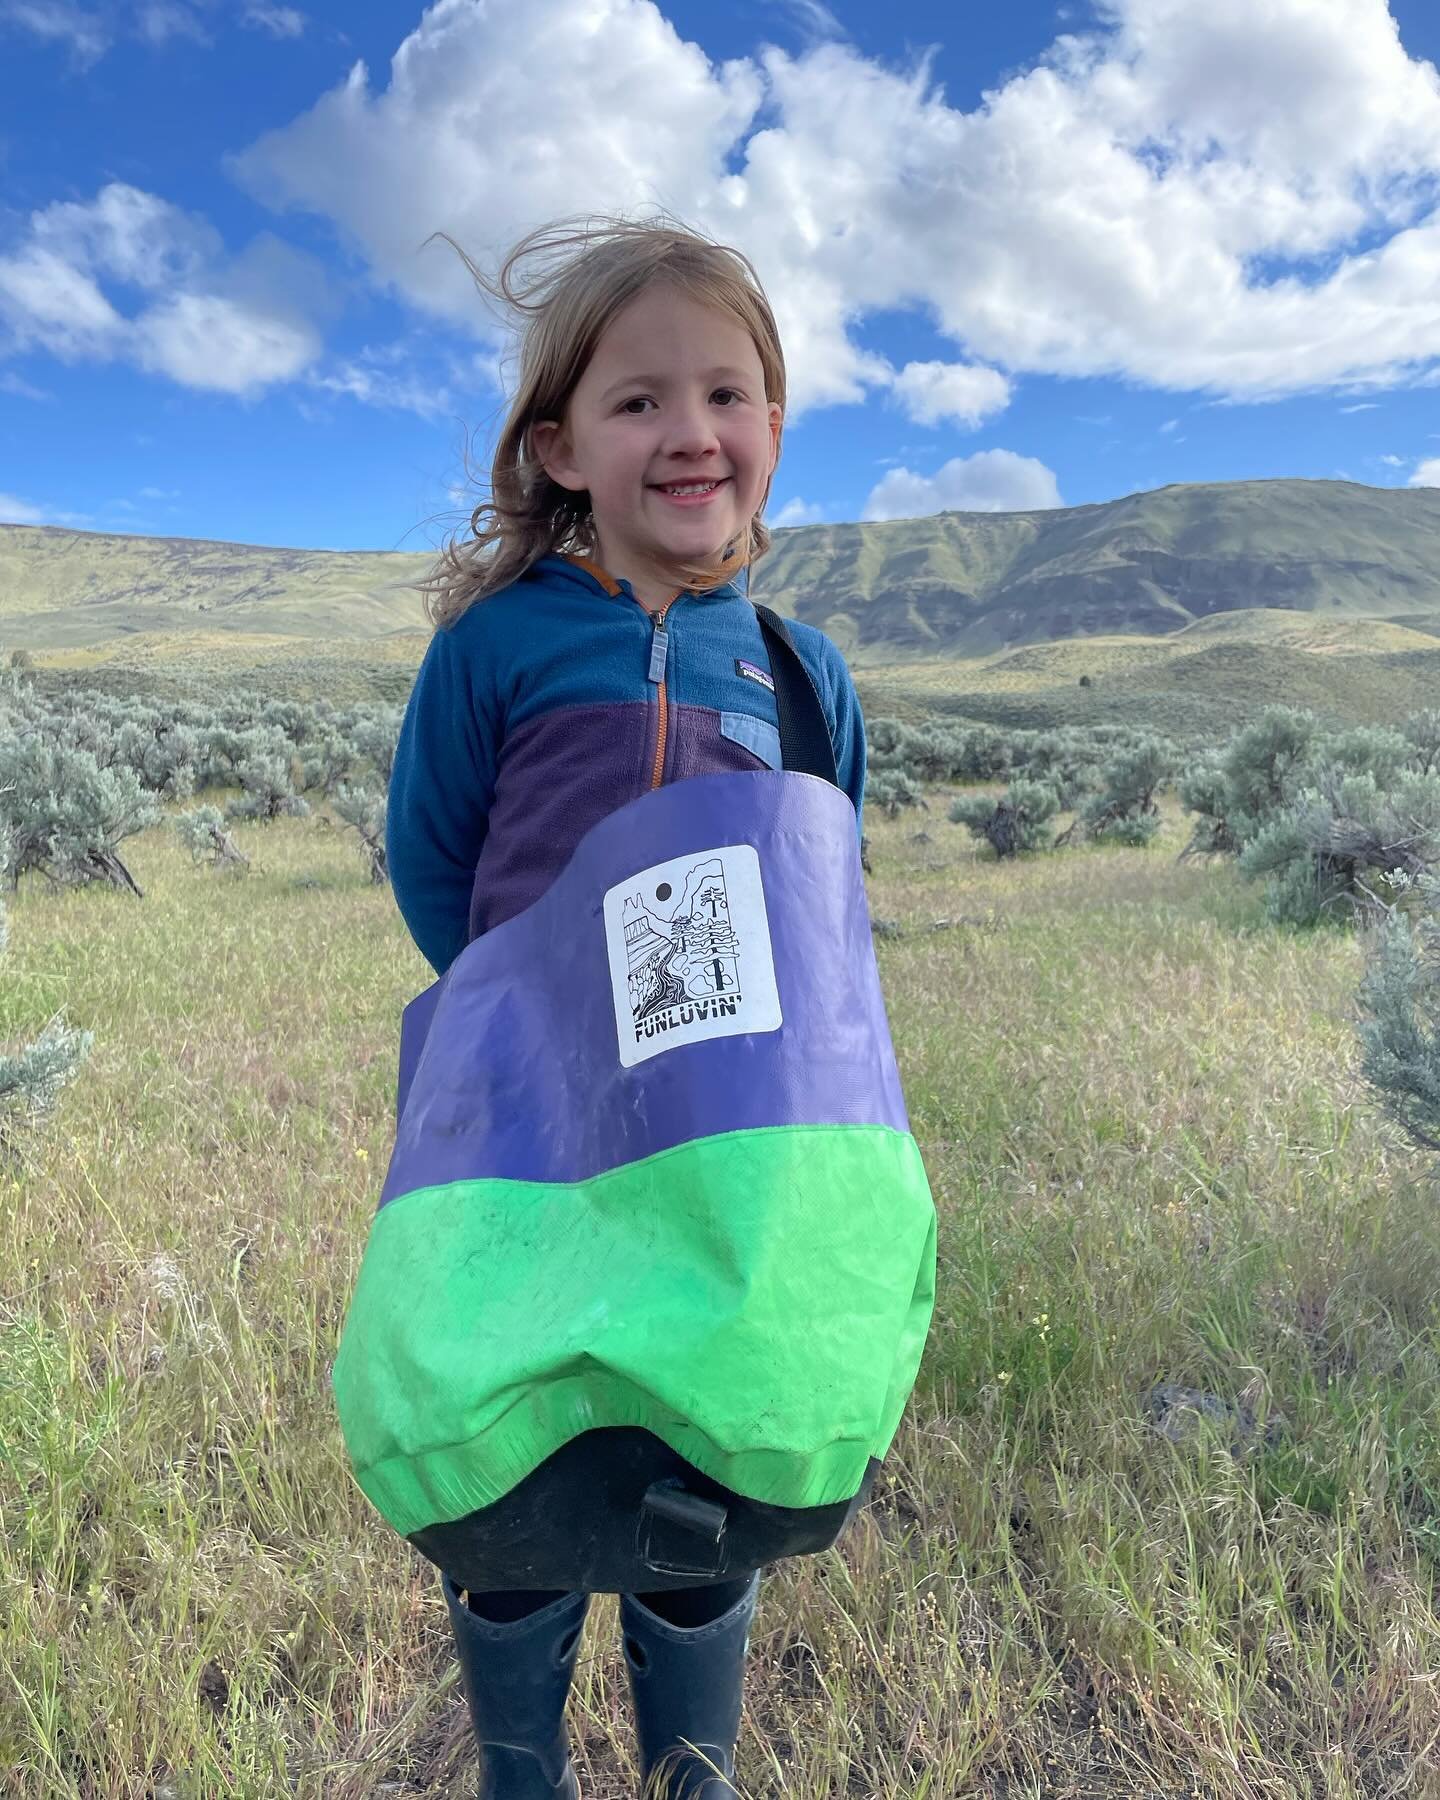 Sweet lil Ruby exploring around camp on the Owyhee this past weekend with her FunLuvin&rsquo; Bucket Bag!

#funluvin #funluvinfleecewear #funluvinfleece #bucketbag #jacksplastic #shoppingbag #forgetheplastic #owyhee #privatetrip #boatingwithfriends #